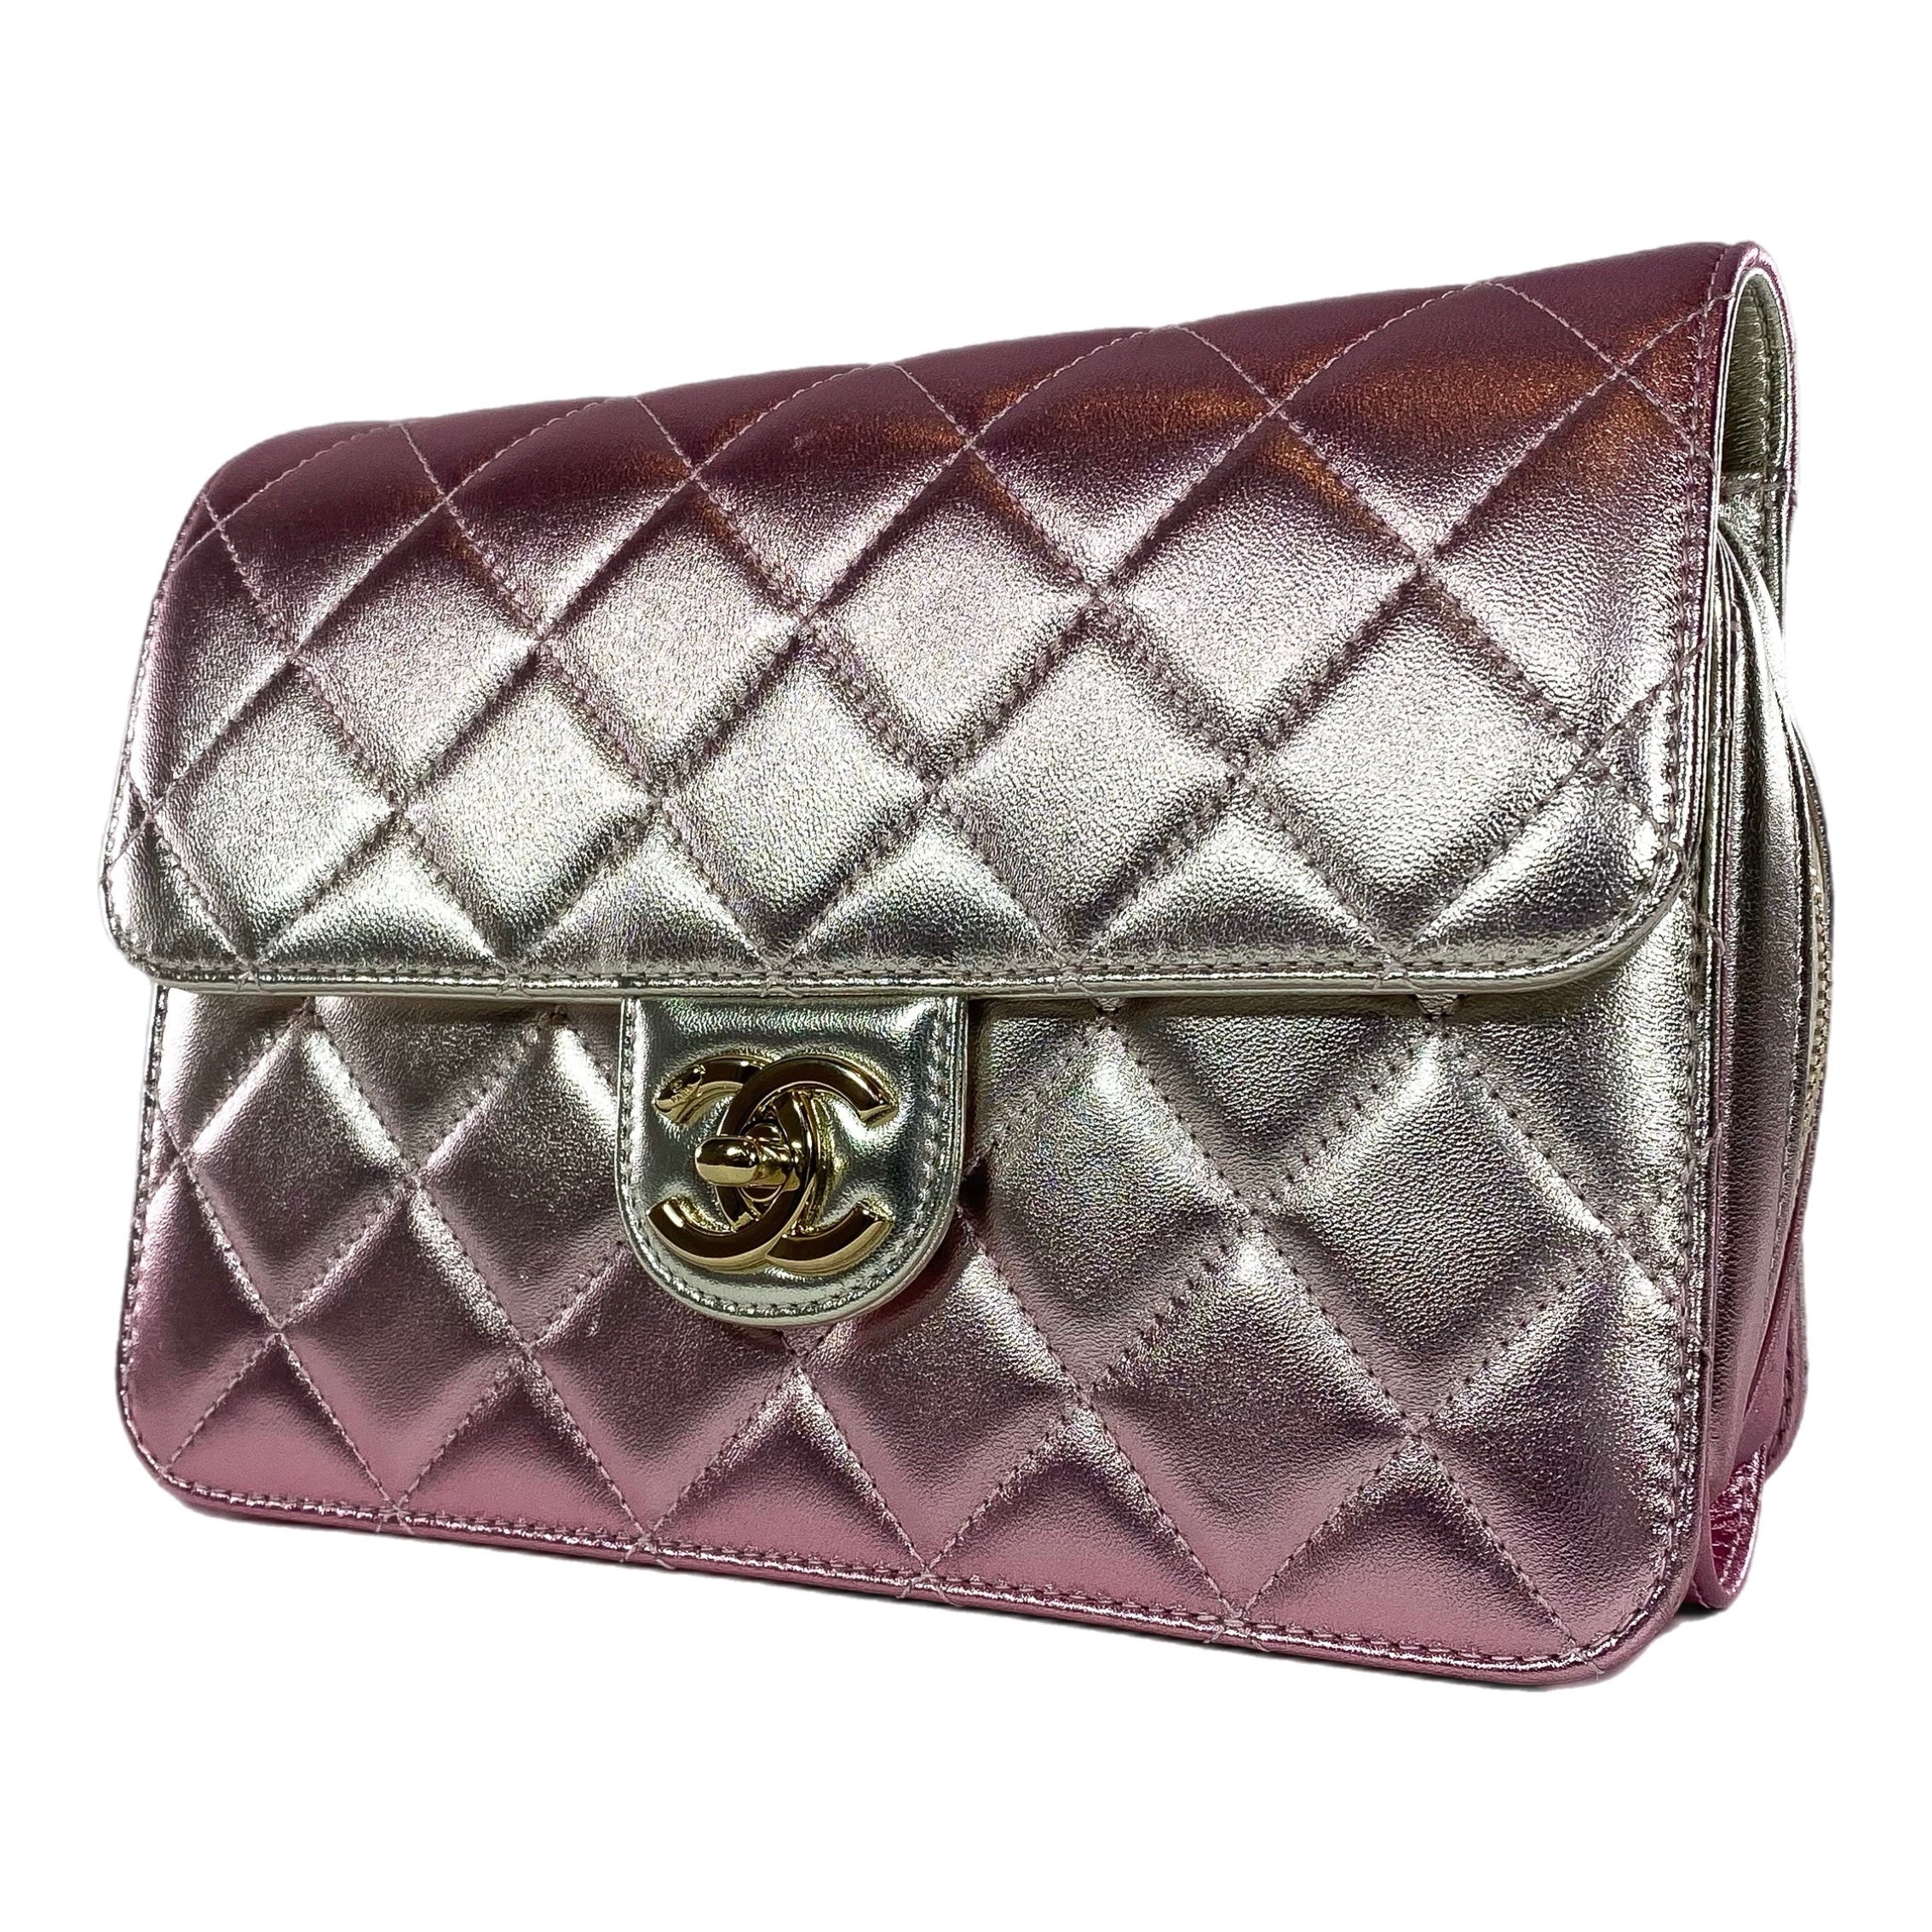 Chanel Like A Wallet Pink Gradient Metallic Quilted Flap Bag